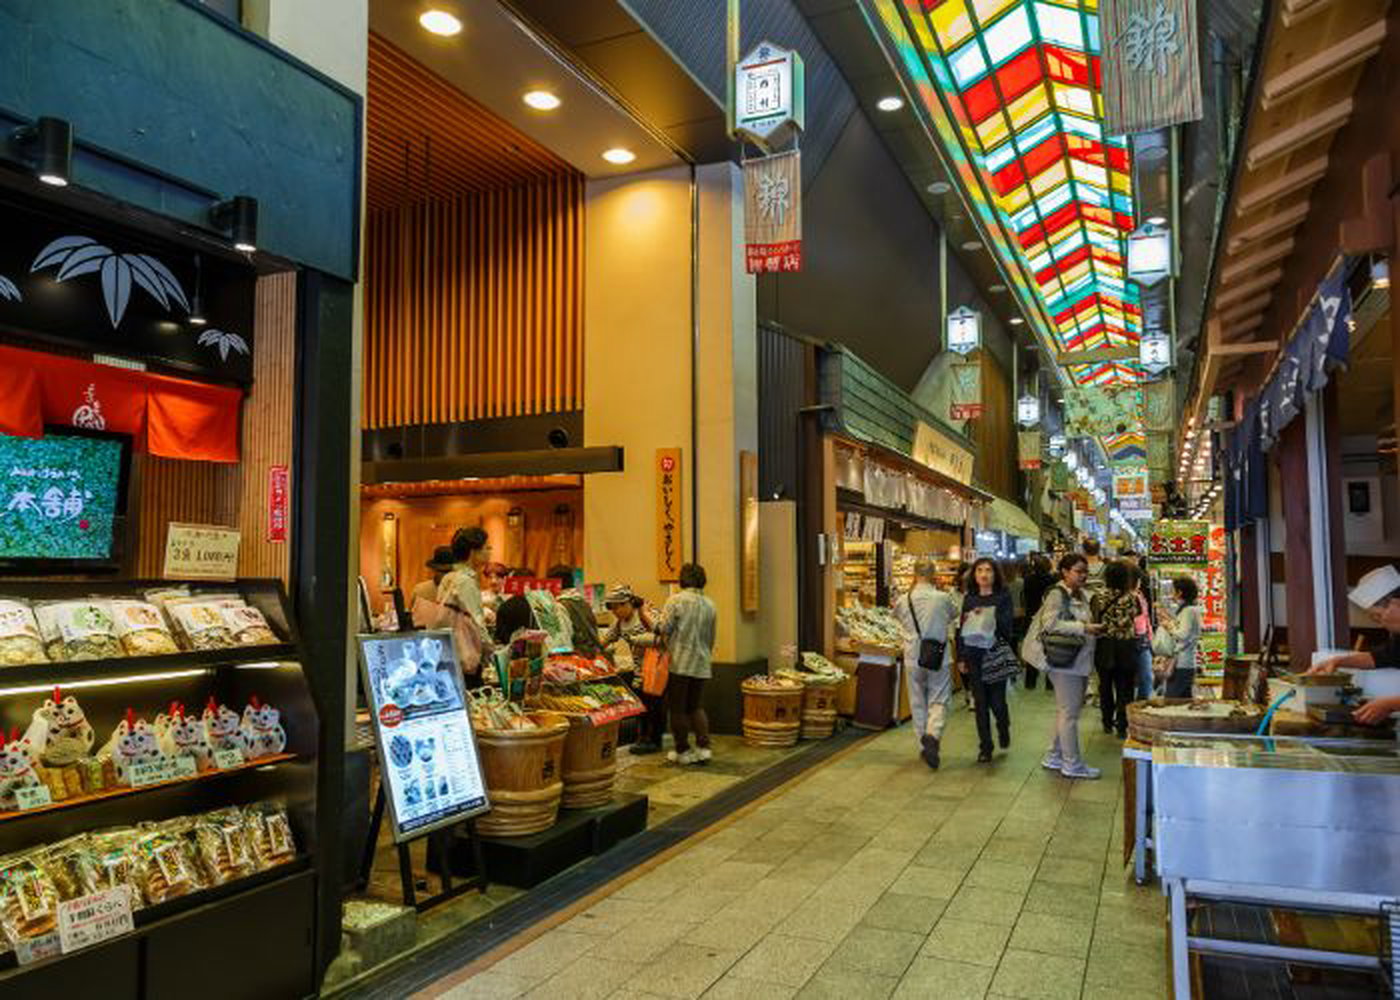 Kyoto's Nishiki Market, with its multi-colored skylight and many storefronts.